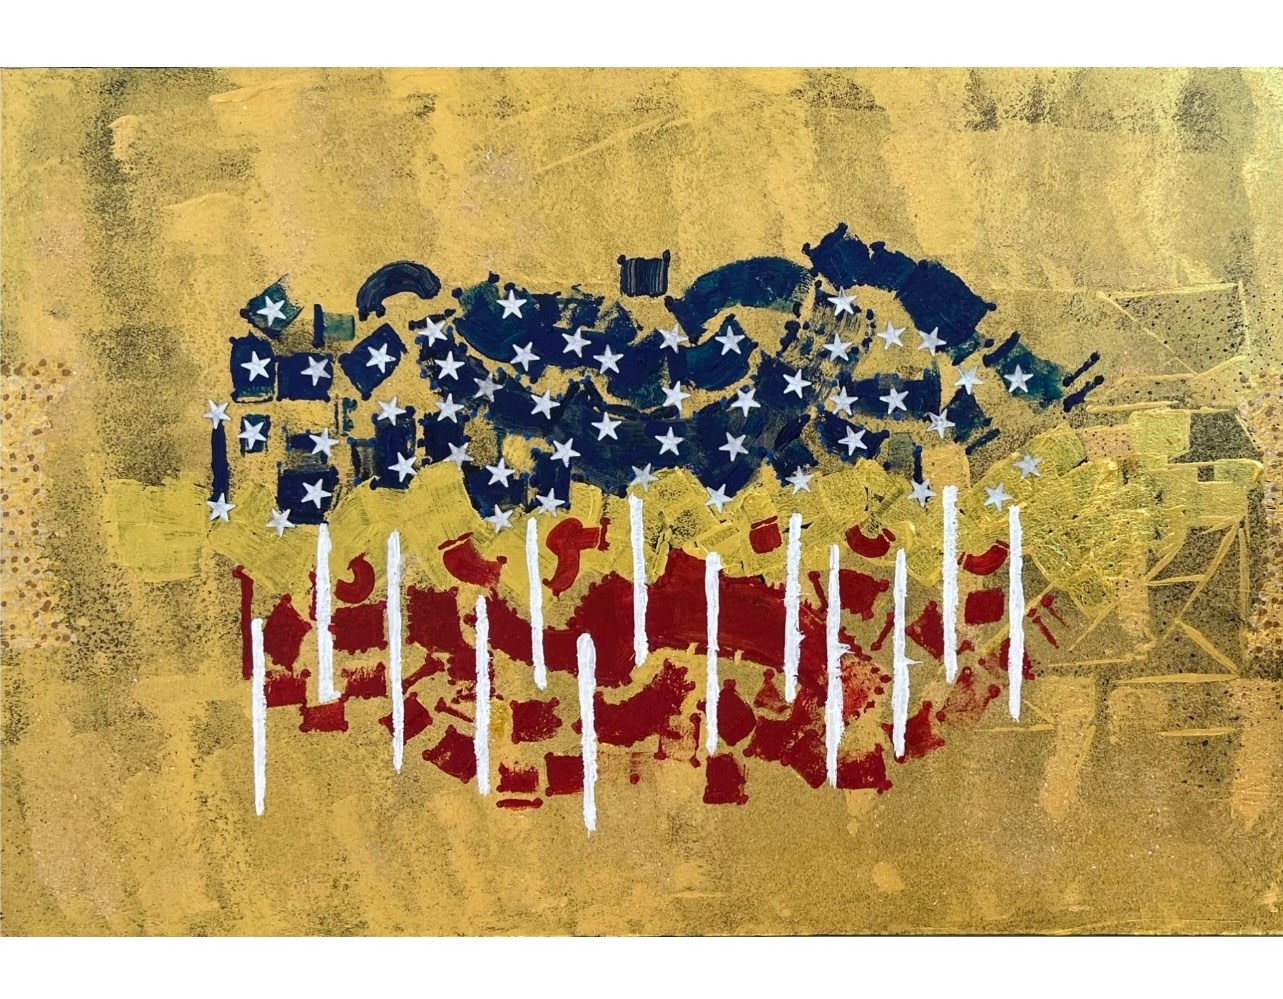 Myrtho Celestin,&amp;nbsp;An American Flag (A Distinguished Haitian Diplomat&amp;rsquo;s View), 2023, Acrylic on Canvas, 36 x 24 inches